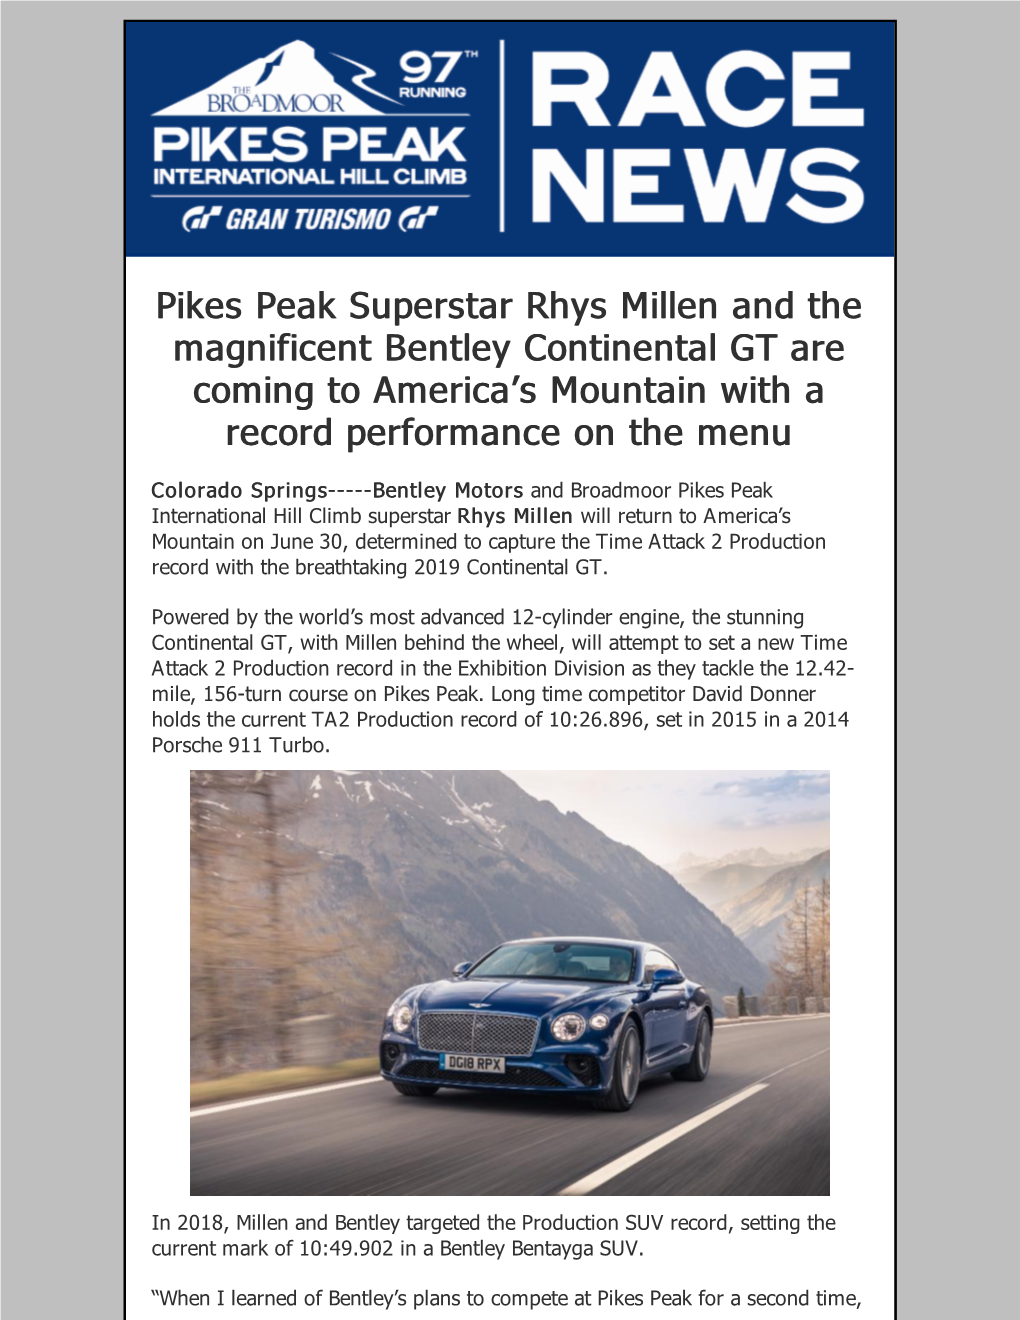 Pikes Peak Superstar Rhys Millen and the Magnificent Bentley Continental GT Are Coming to America’S Mountain with a Record Performance on the Menu